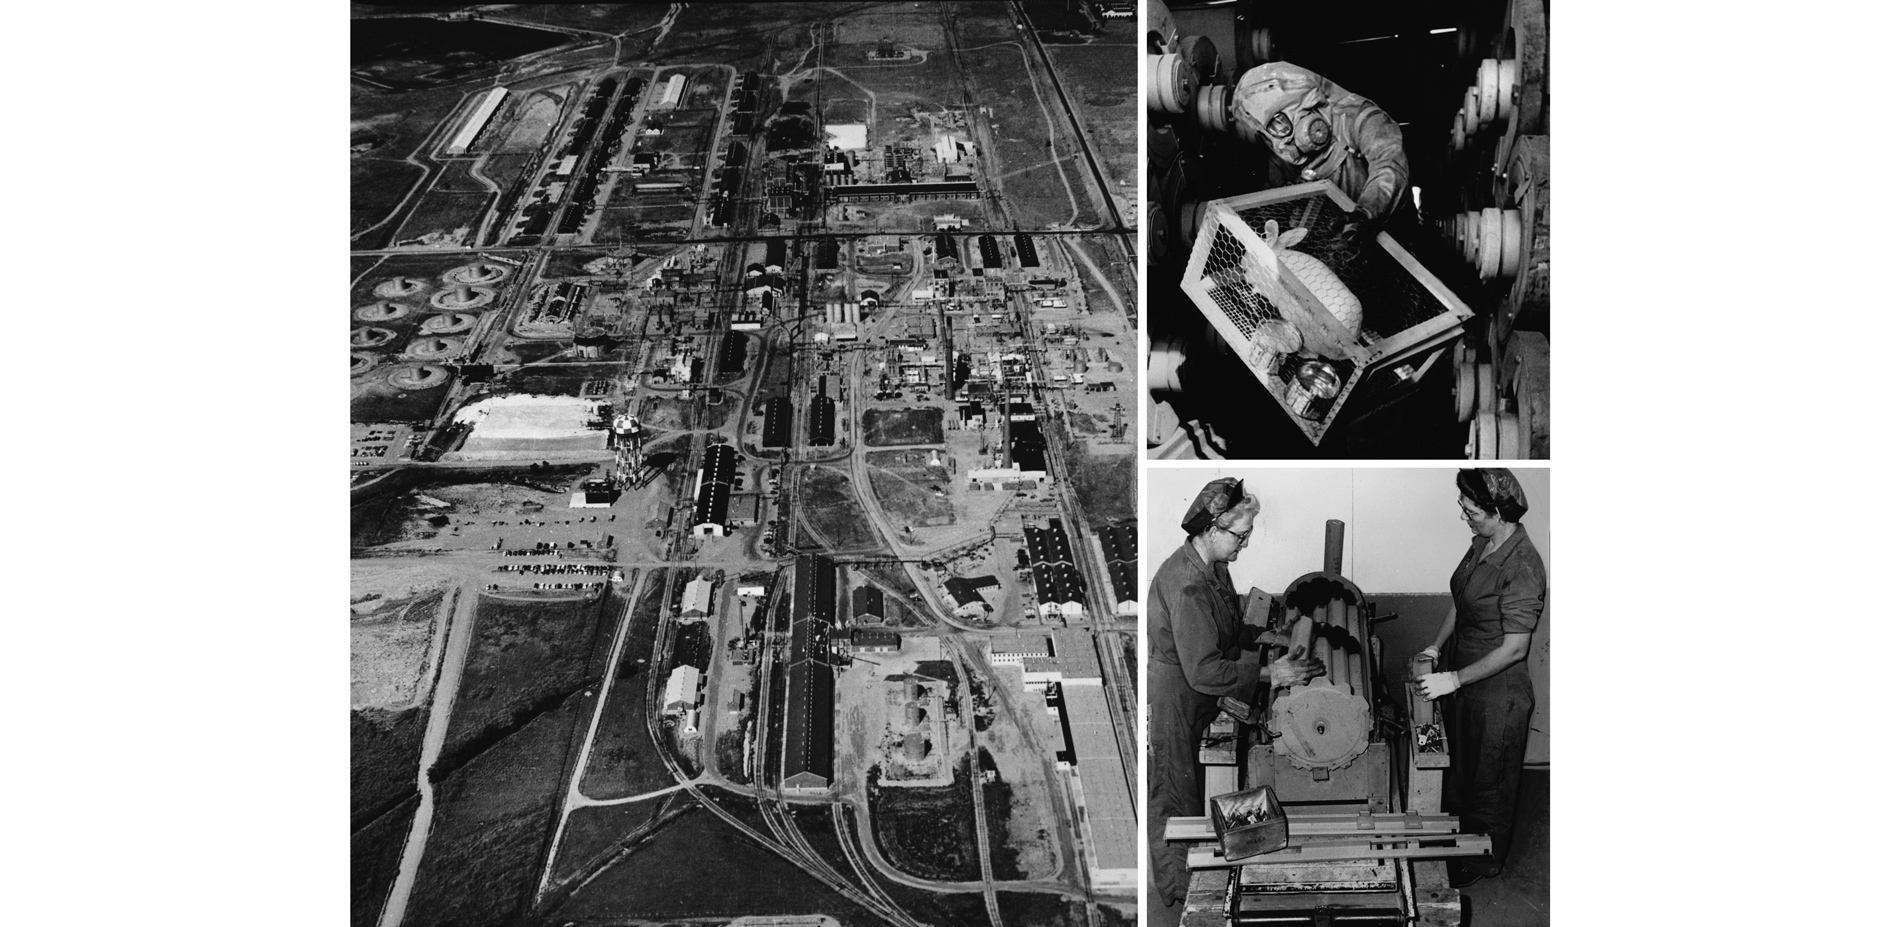 In the wake of Pearl Harbor, the U.S. Army constructed the Arsenal and produced biological and chemical weapons. Although entities used acceptable was…